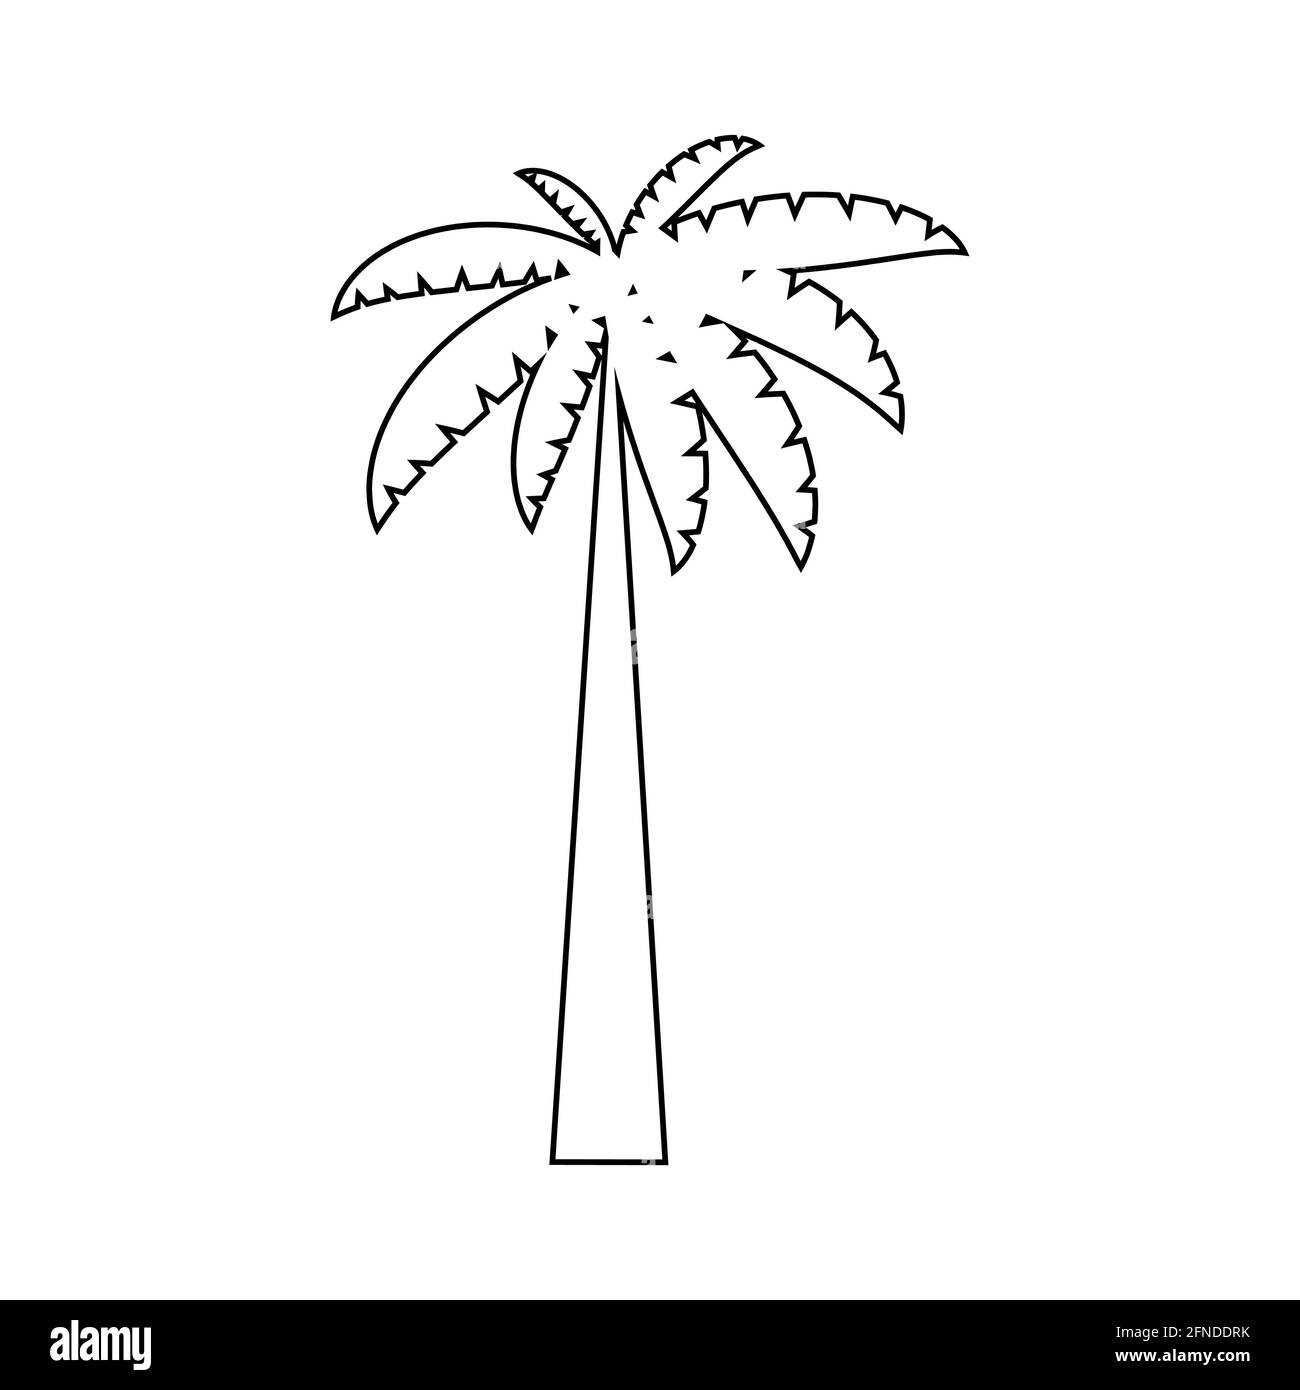 Tropical palm trees, black silhouettes and outline contours on white ...